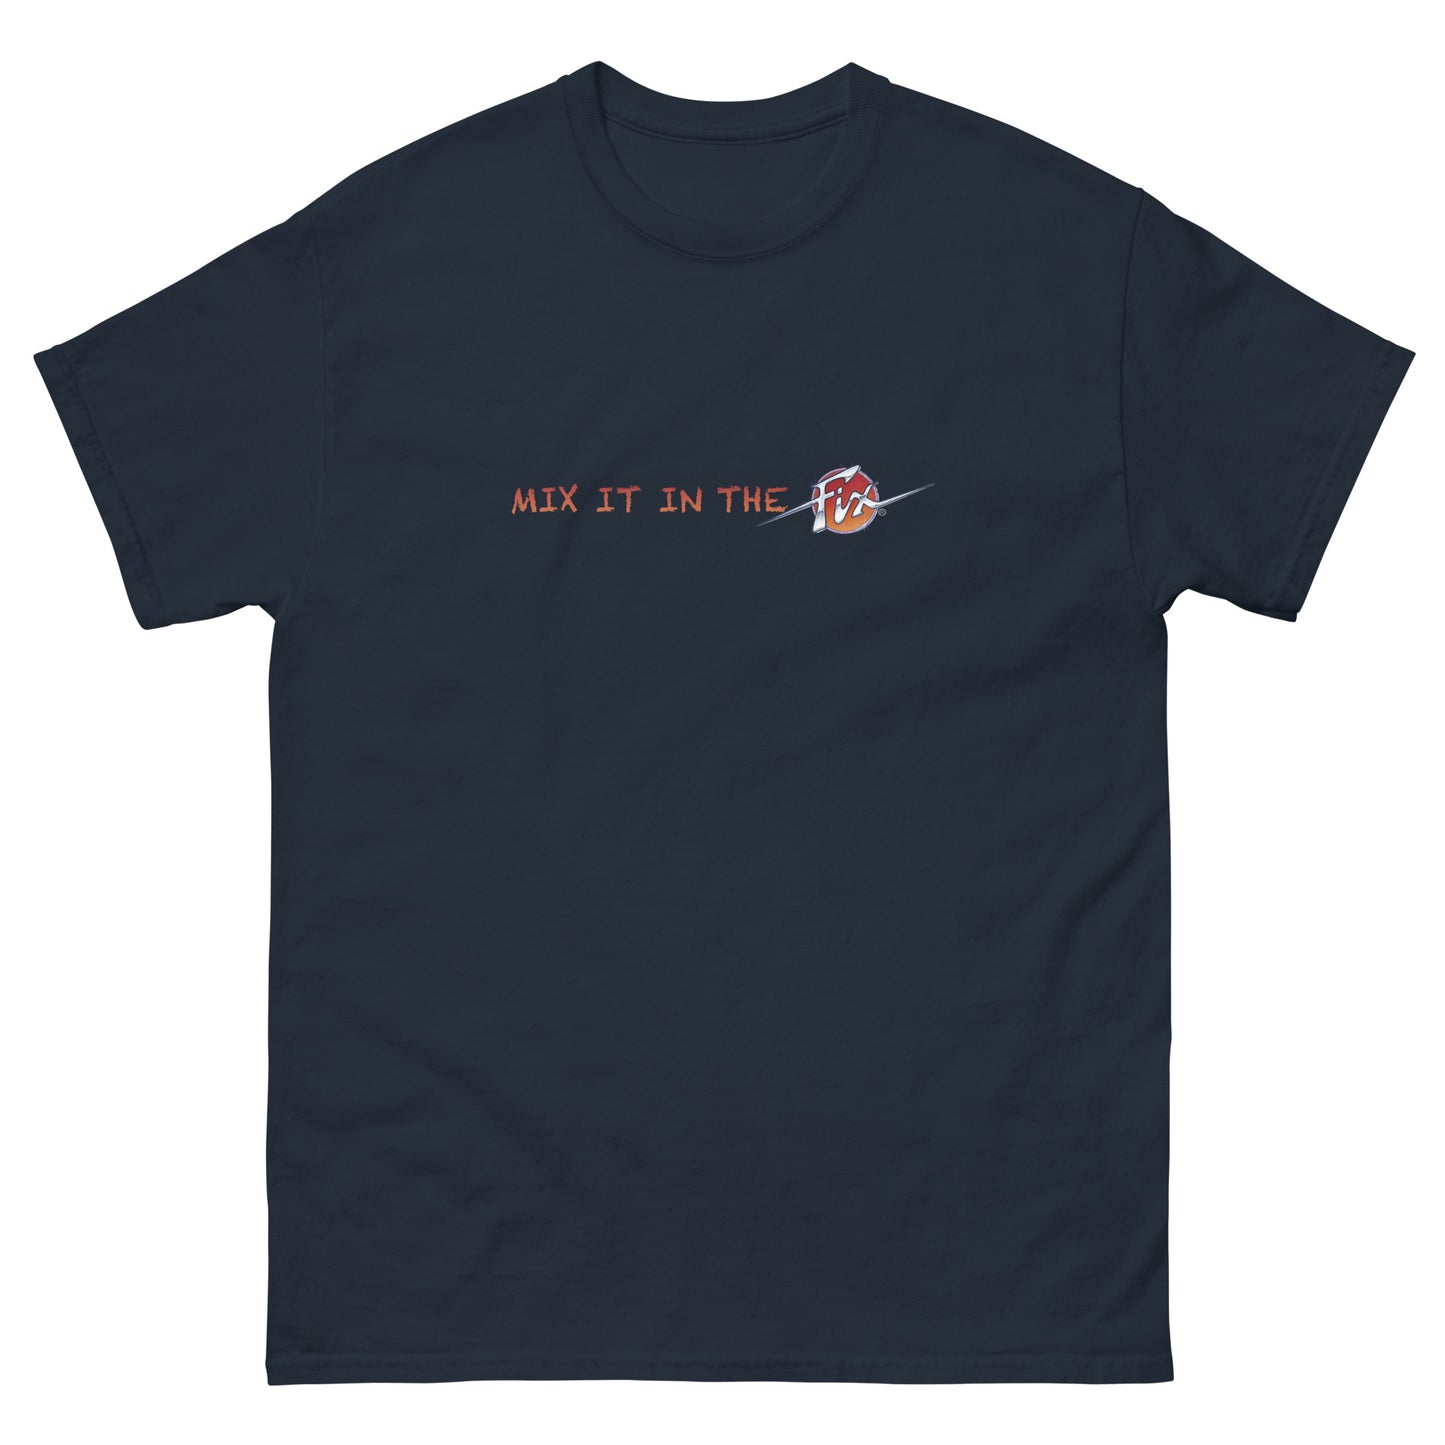 "Mix It In The Fix" classic tee